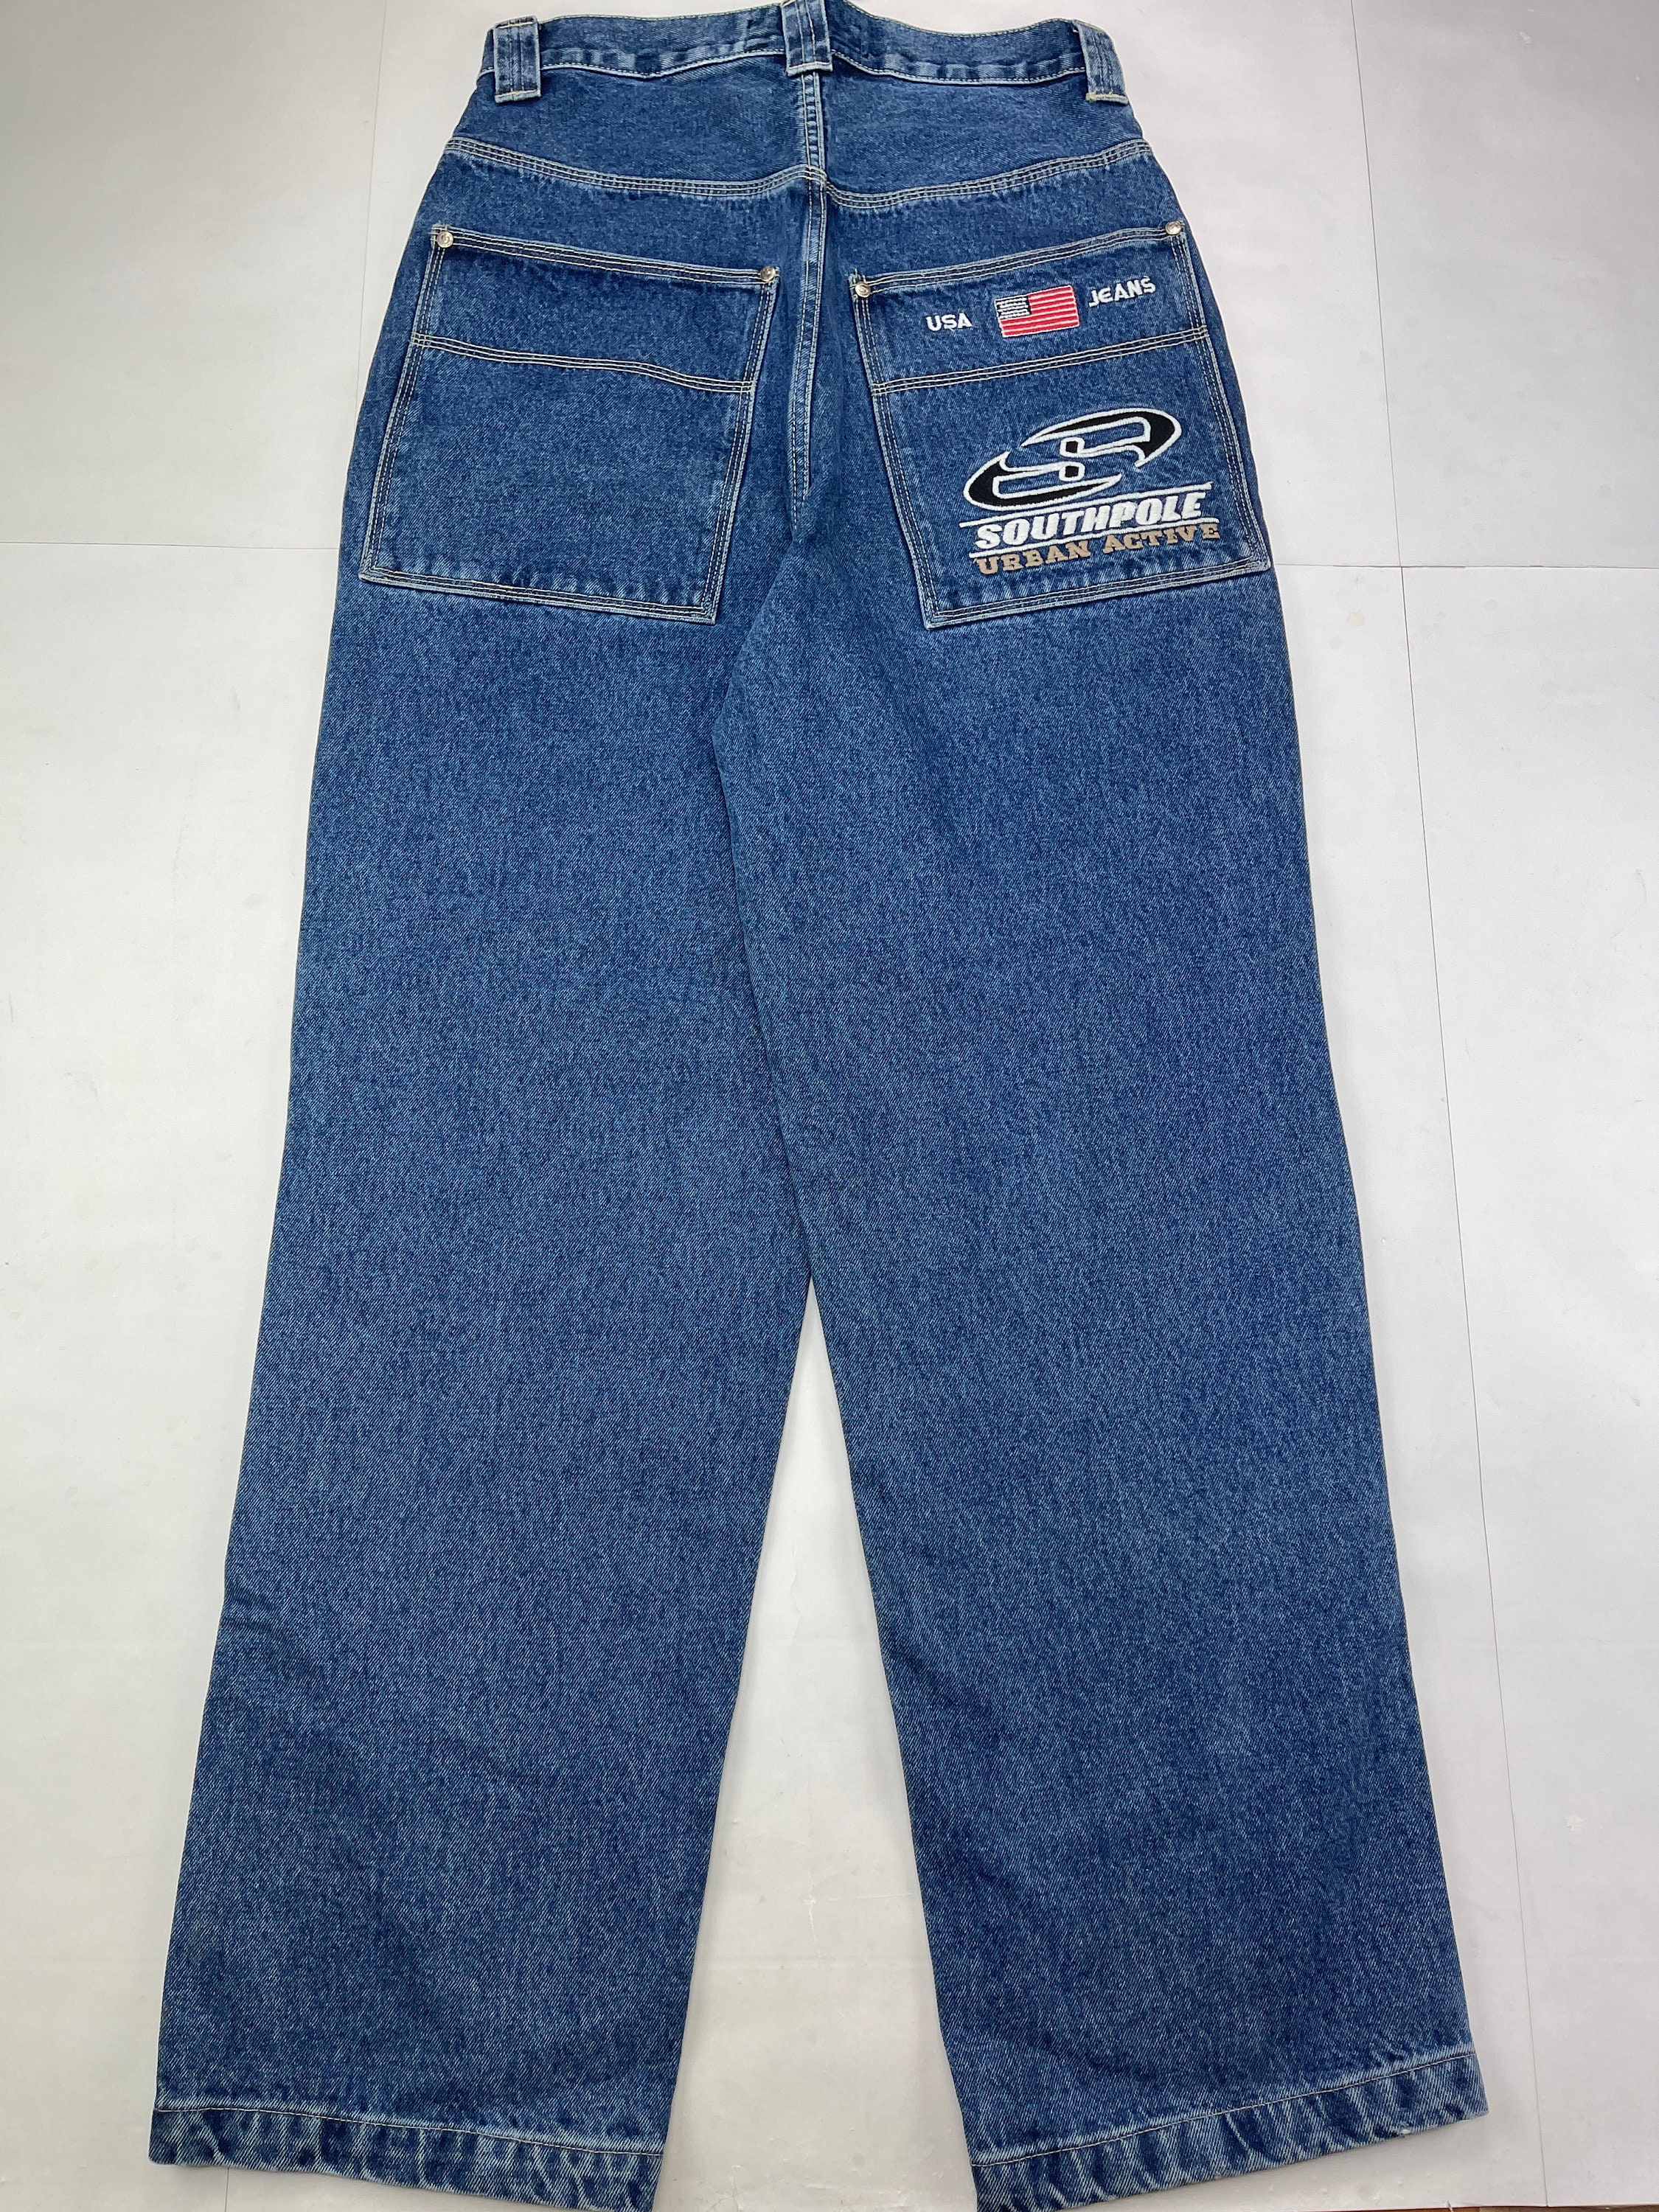 2000s South Pole Baggy Jeans // Deadstock hmif.amikom.ac.id